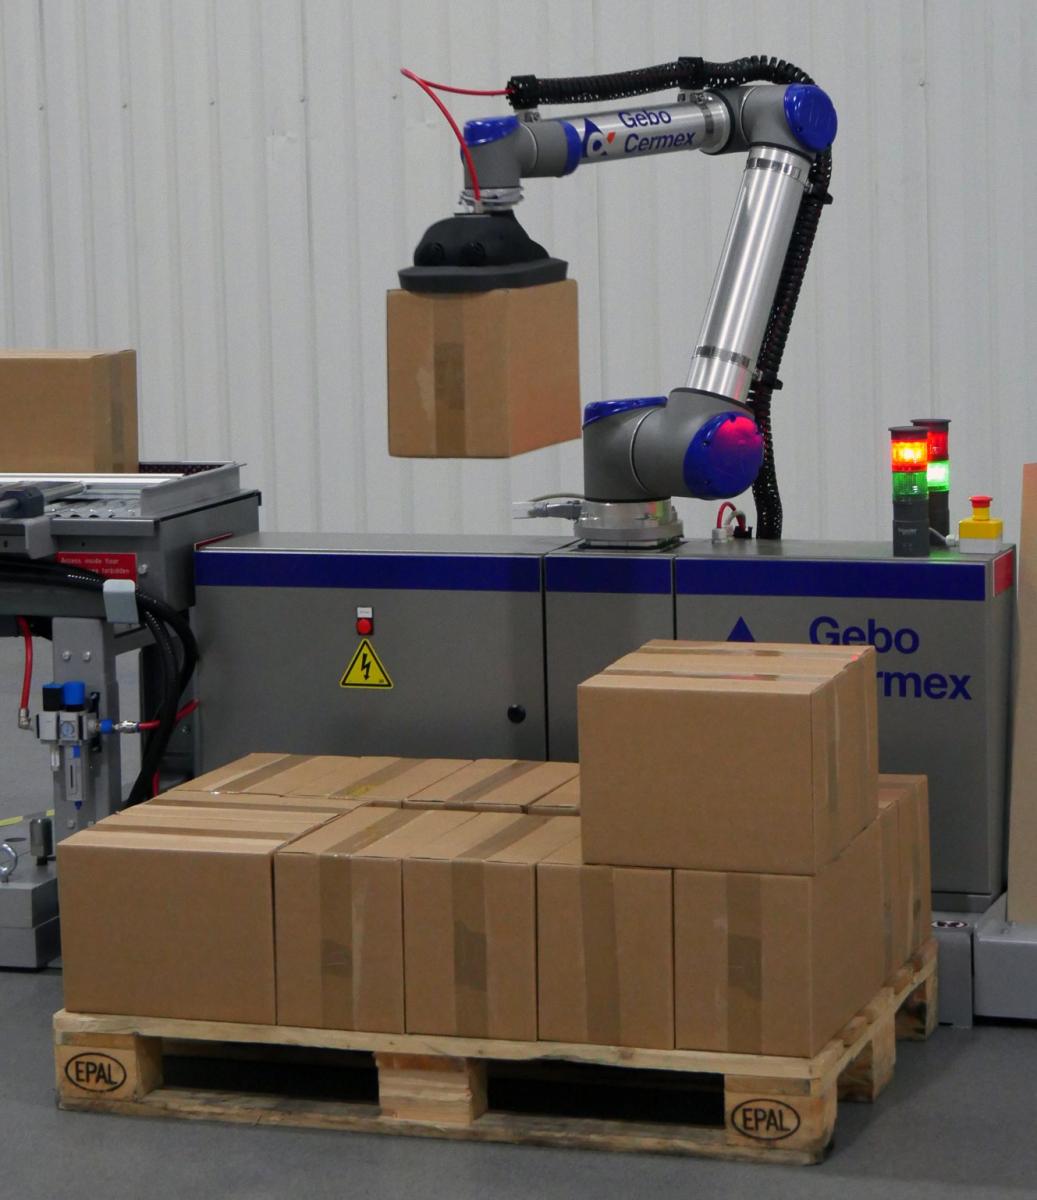 The CoboAccess_Pal cobotic palletiser for low-speed applications